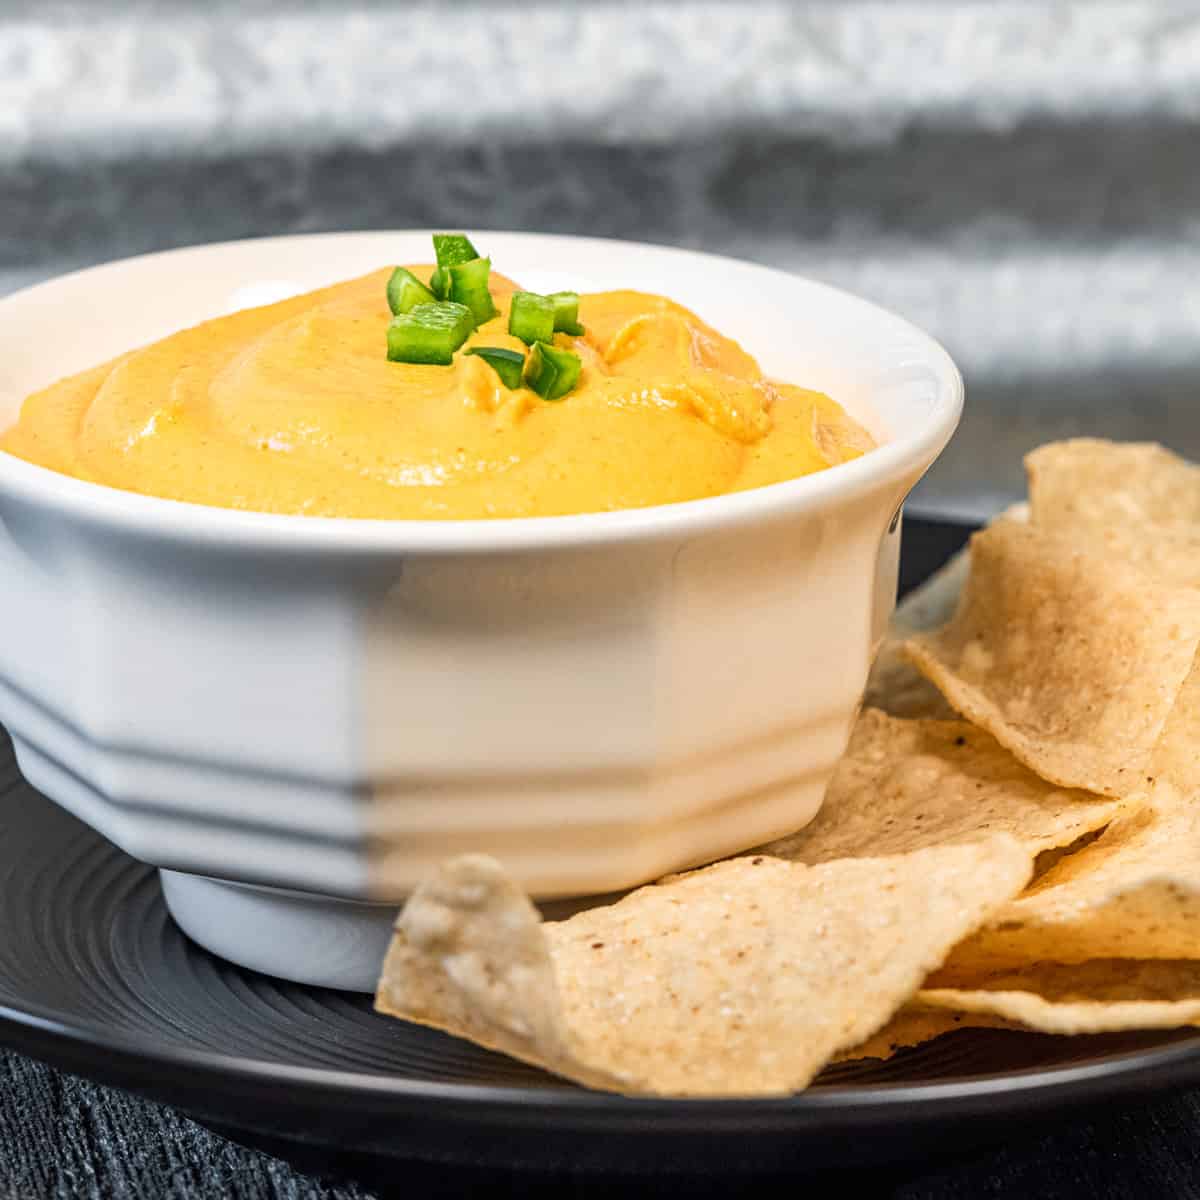 Vegan nacho cheese in a dish with a side of tortilla chips.